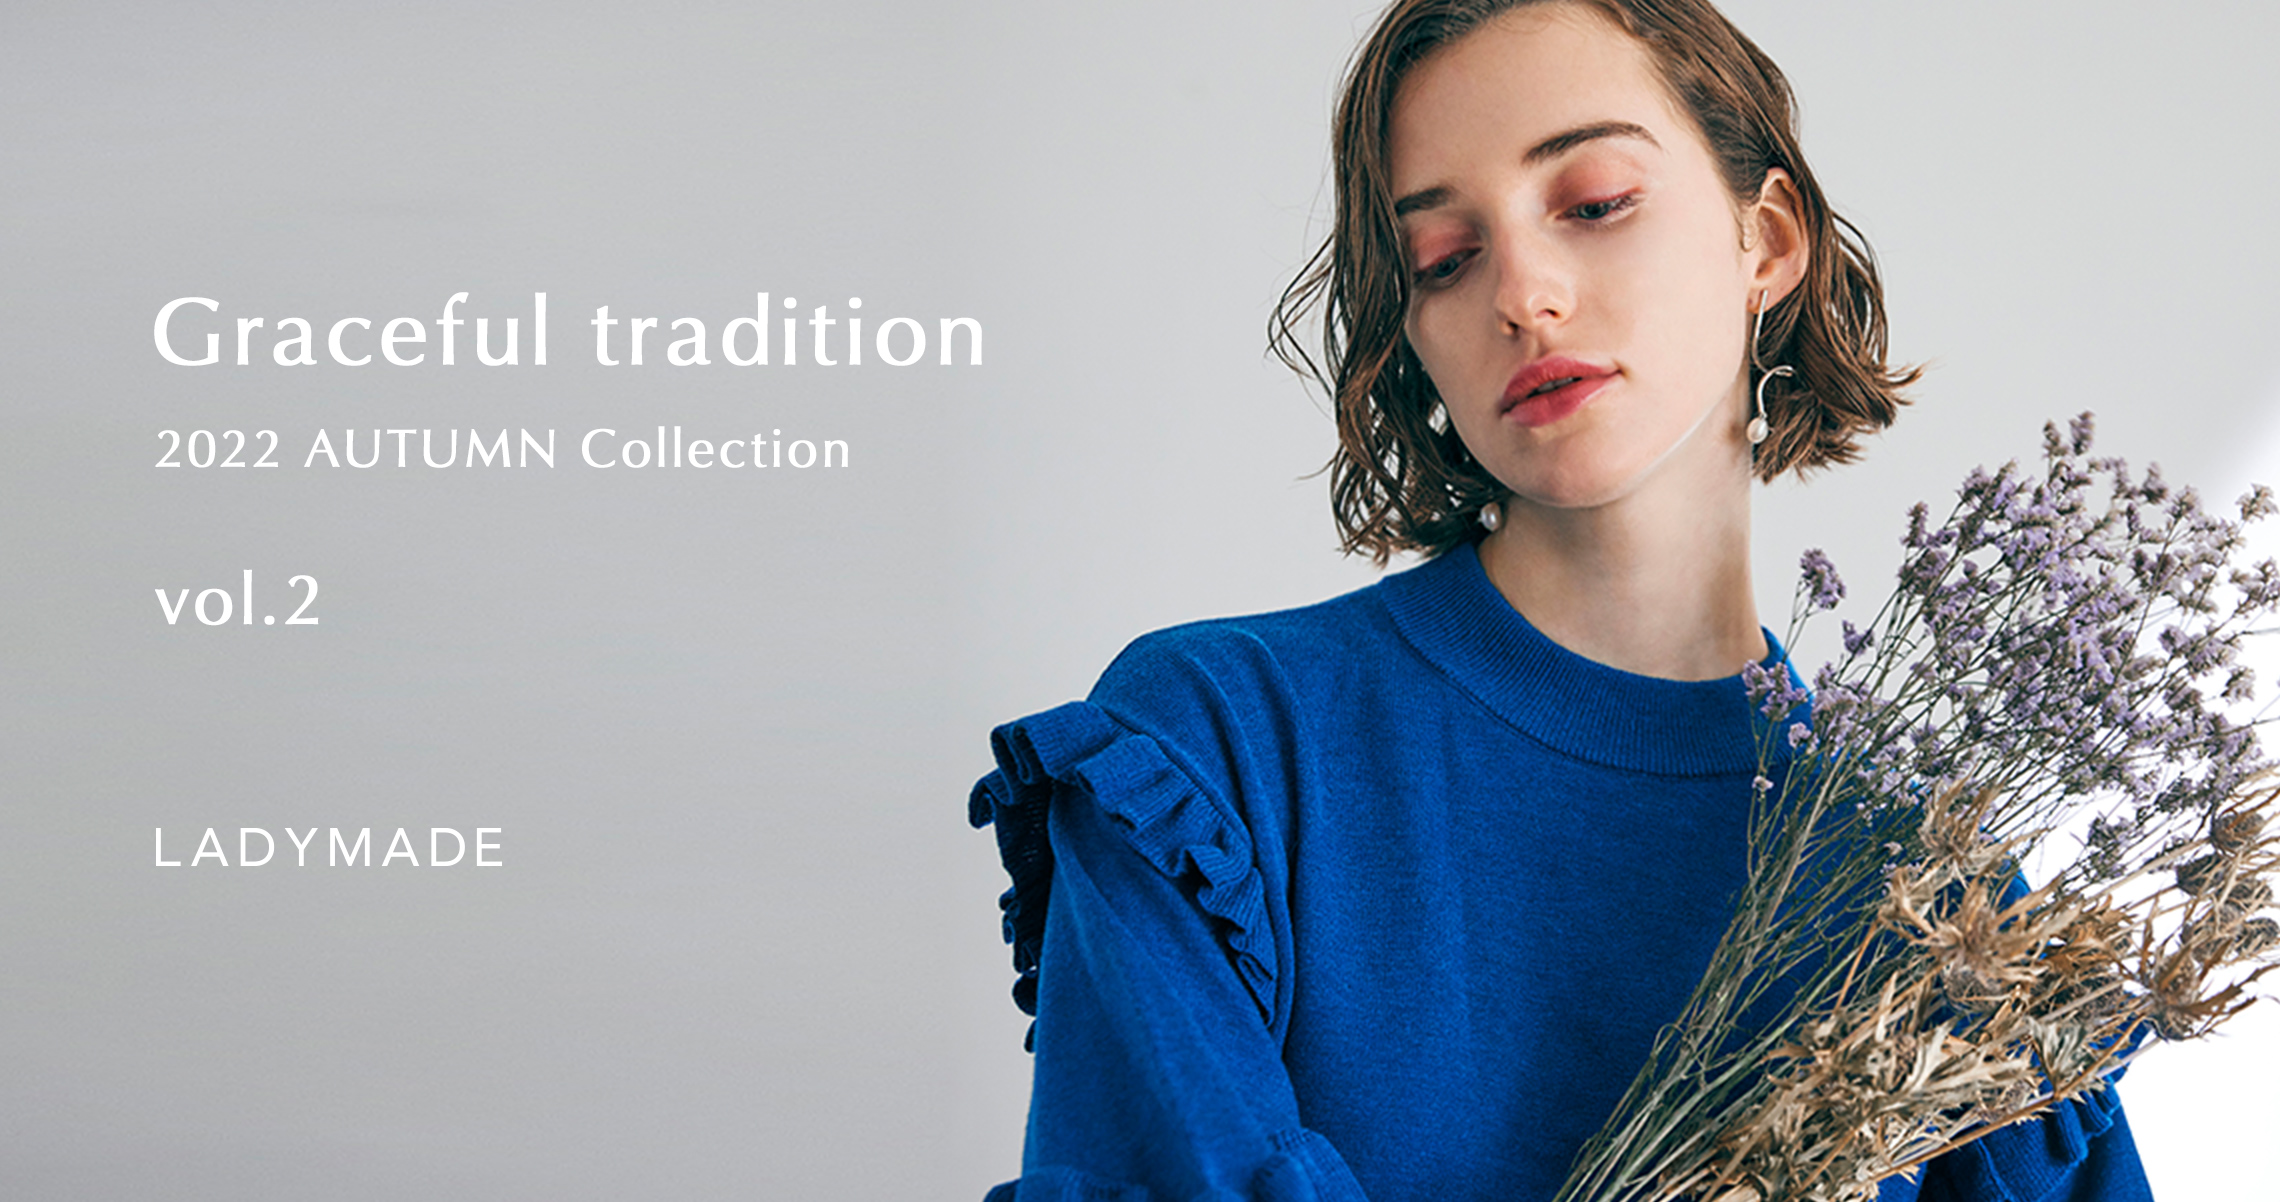 LADYMADE - Graceful tradition 2022 AUTUMN Collection vol.2